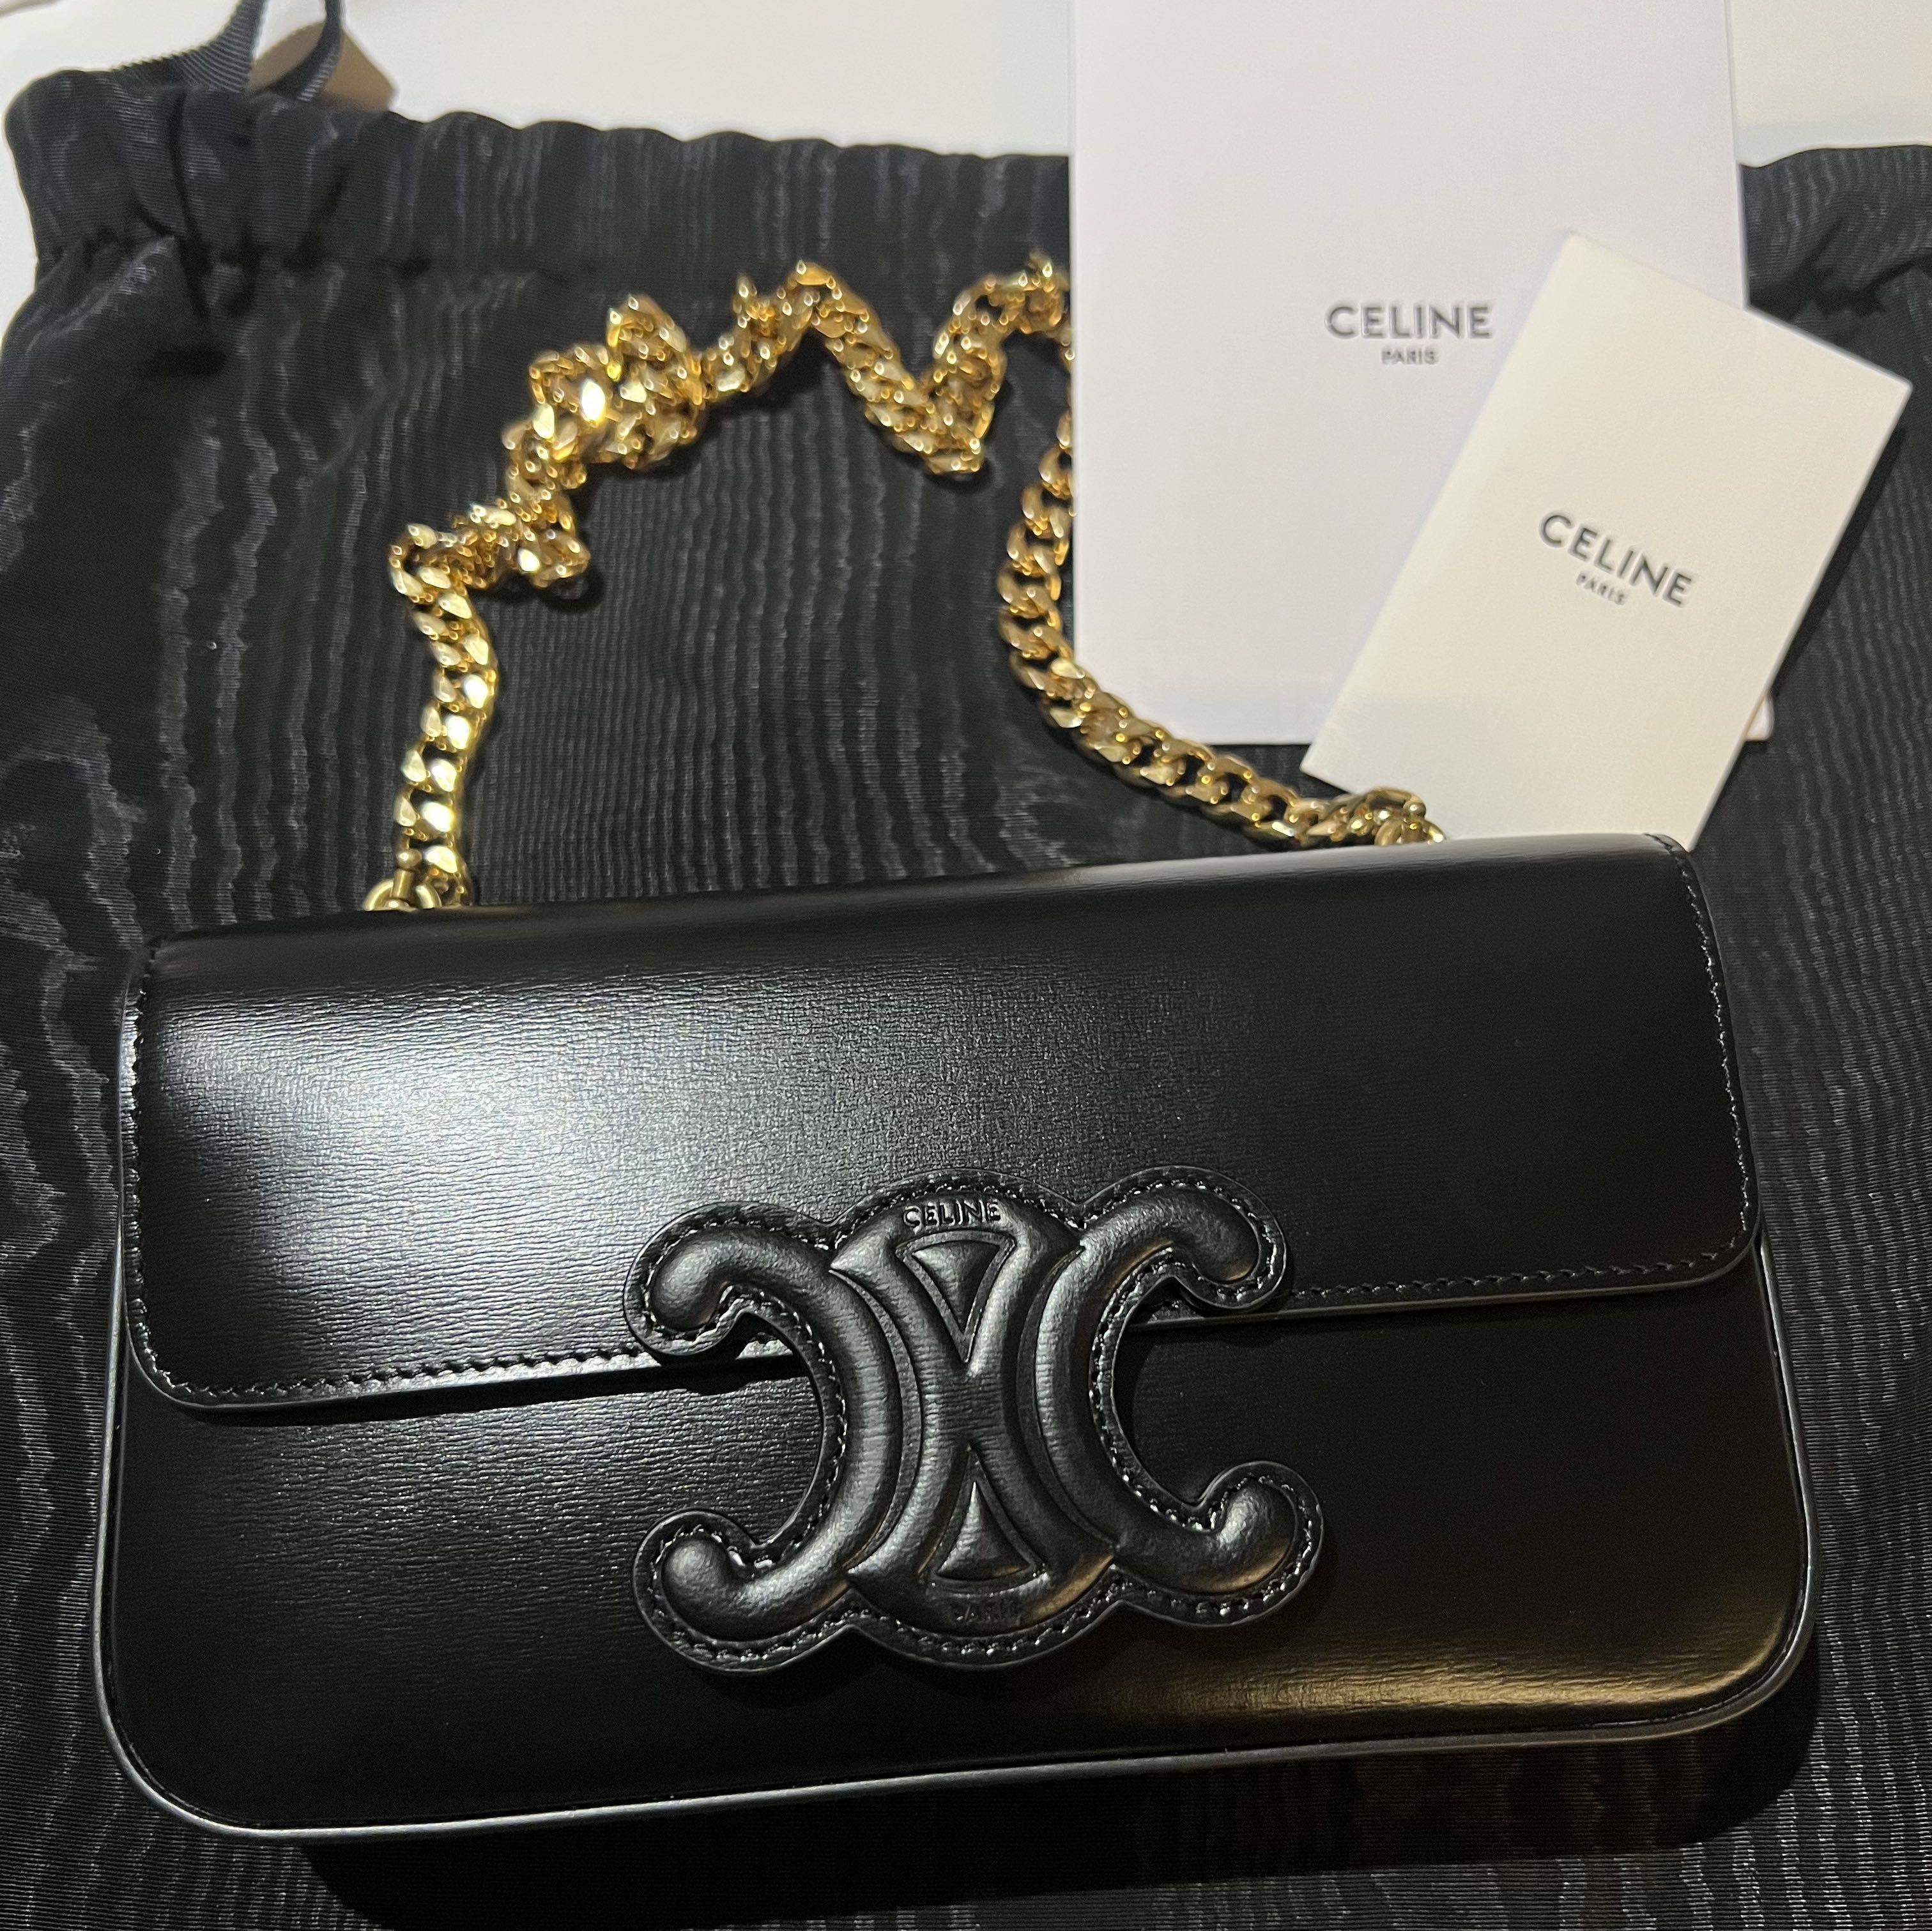 Meet The Chain Shoulder Bag Cuir Triomphe From Celine - BAGAHOLICBOY